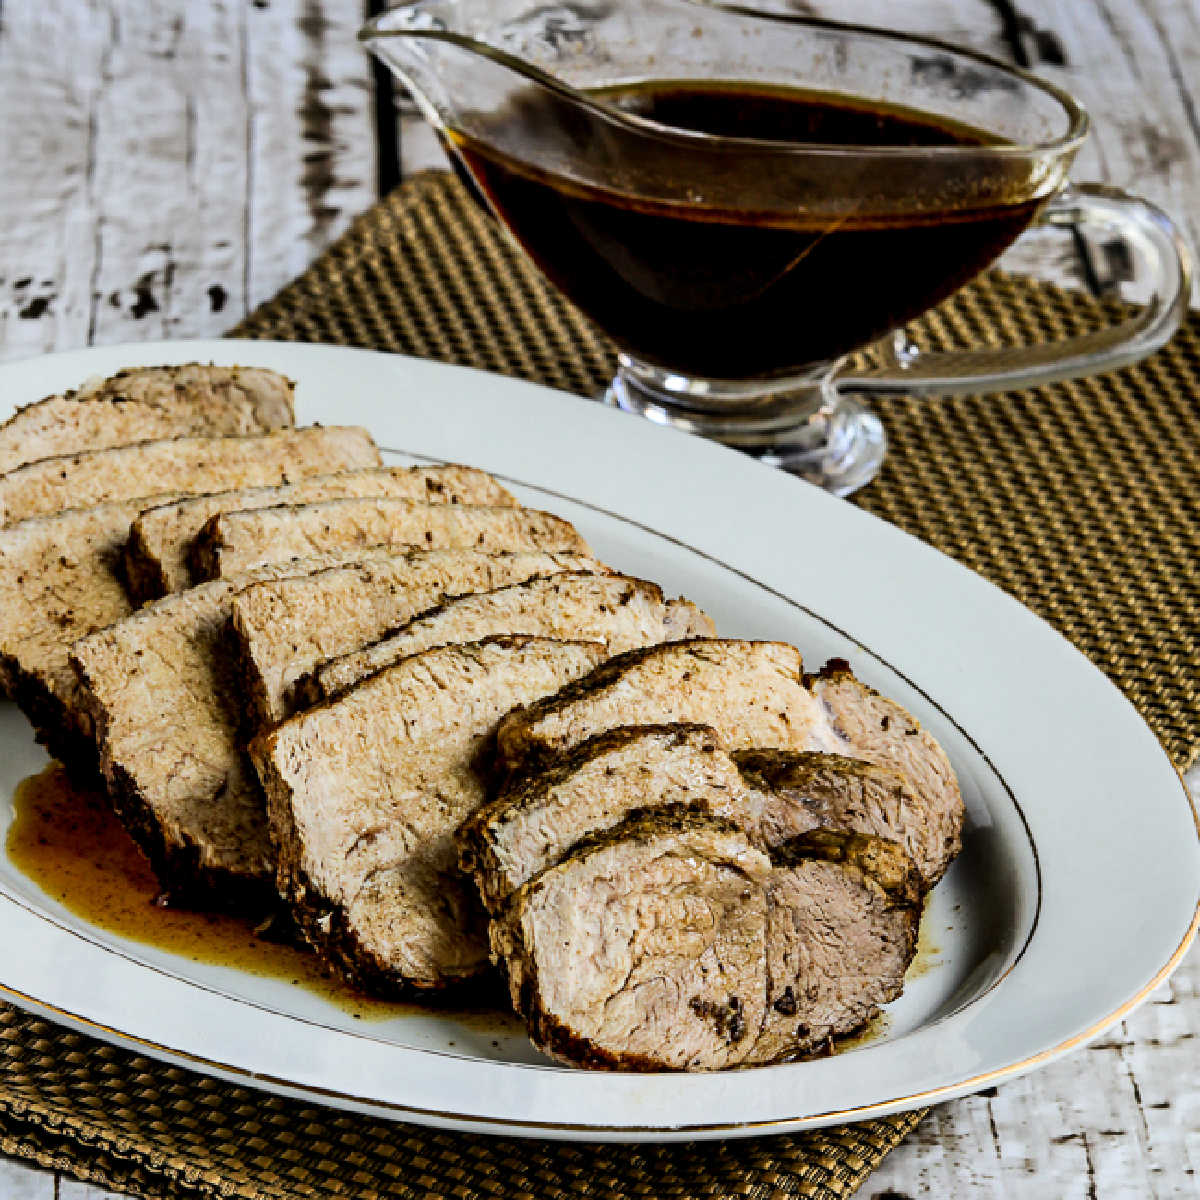 Square image for Slow Cooker Balsamic Pork Roast shown on platter with sauce in back.